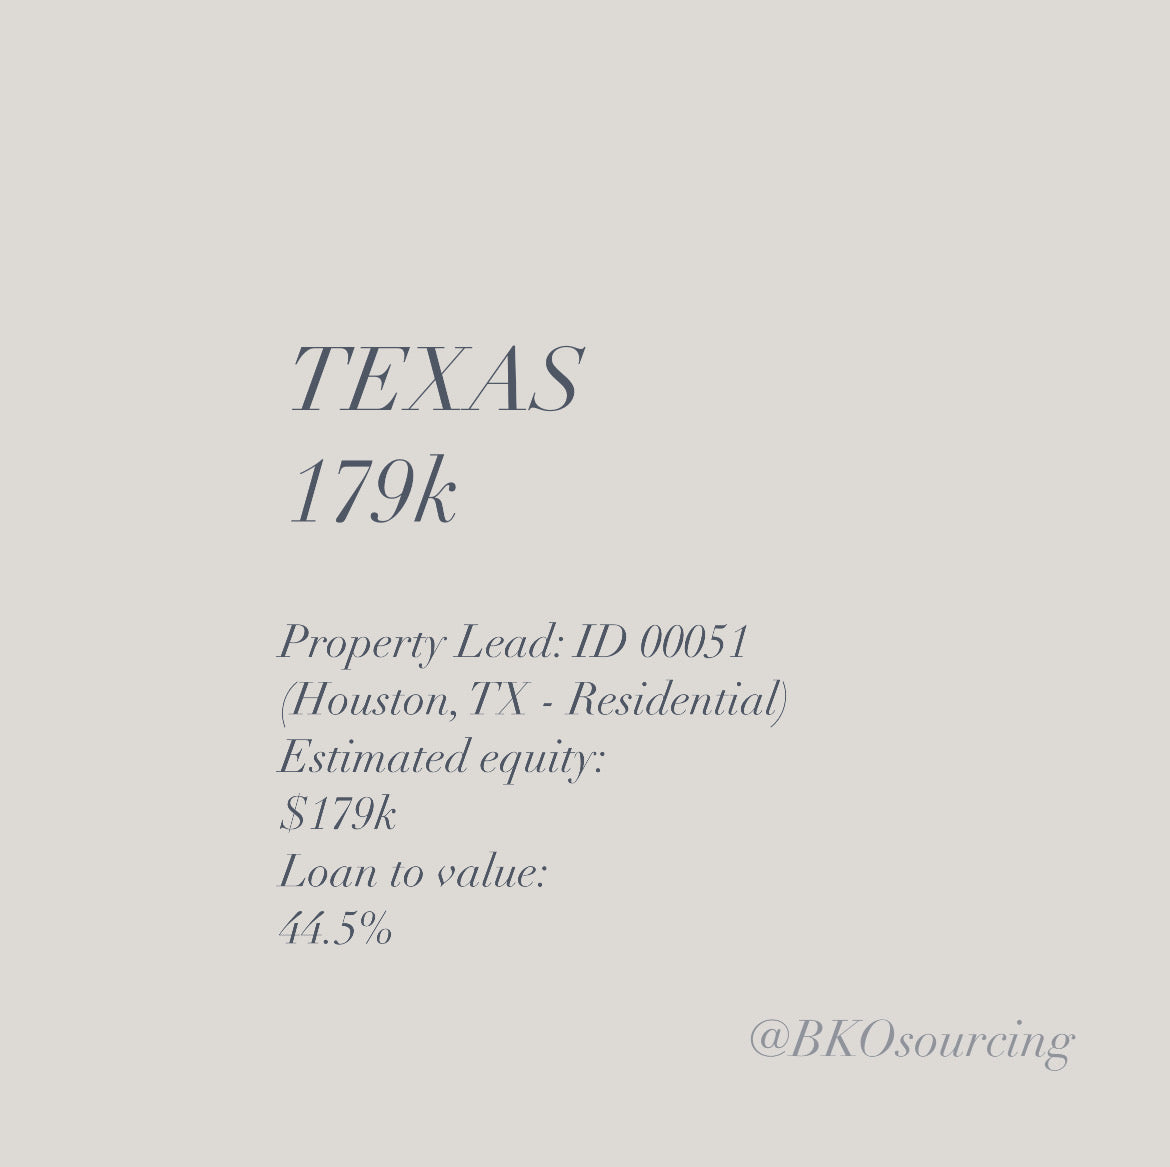 Property Lead 00051 - Texas - Houston - $179k - 44.5% - 2023-23OCT - with comparables